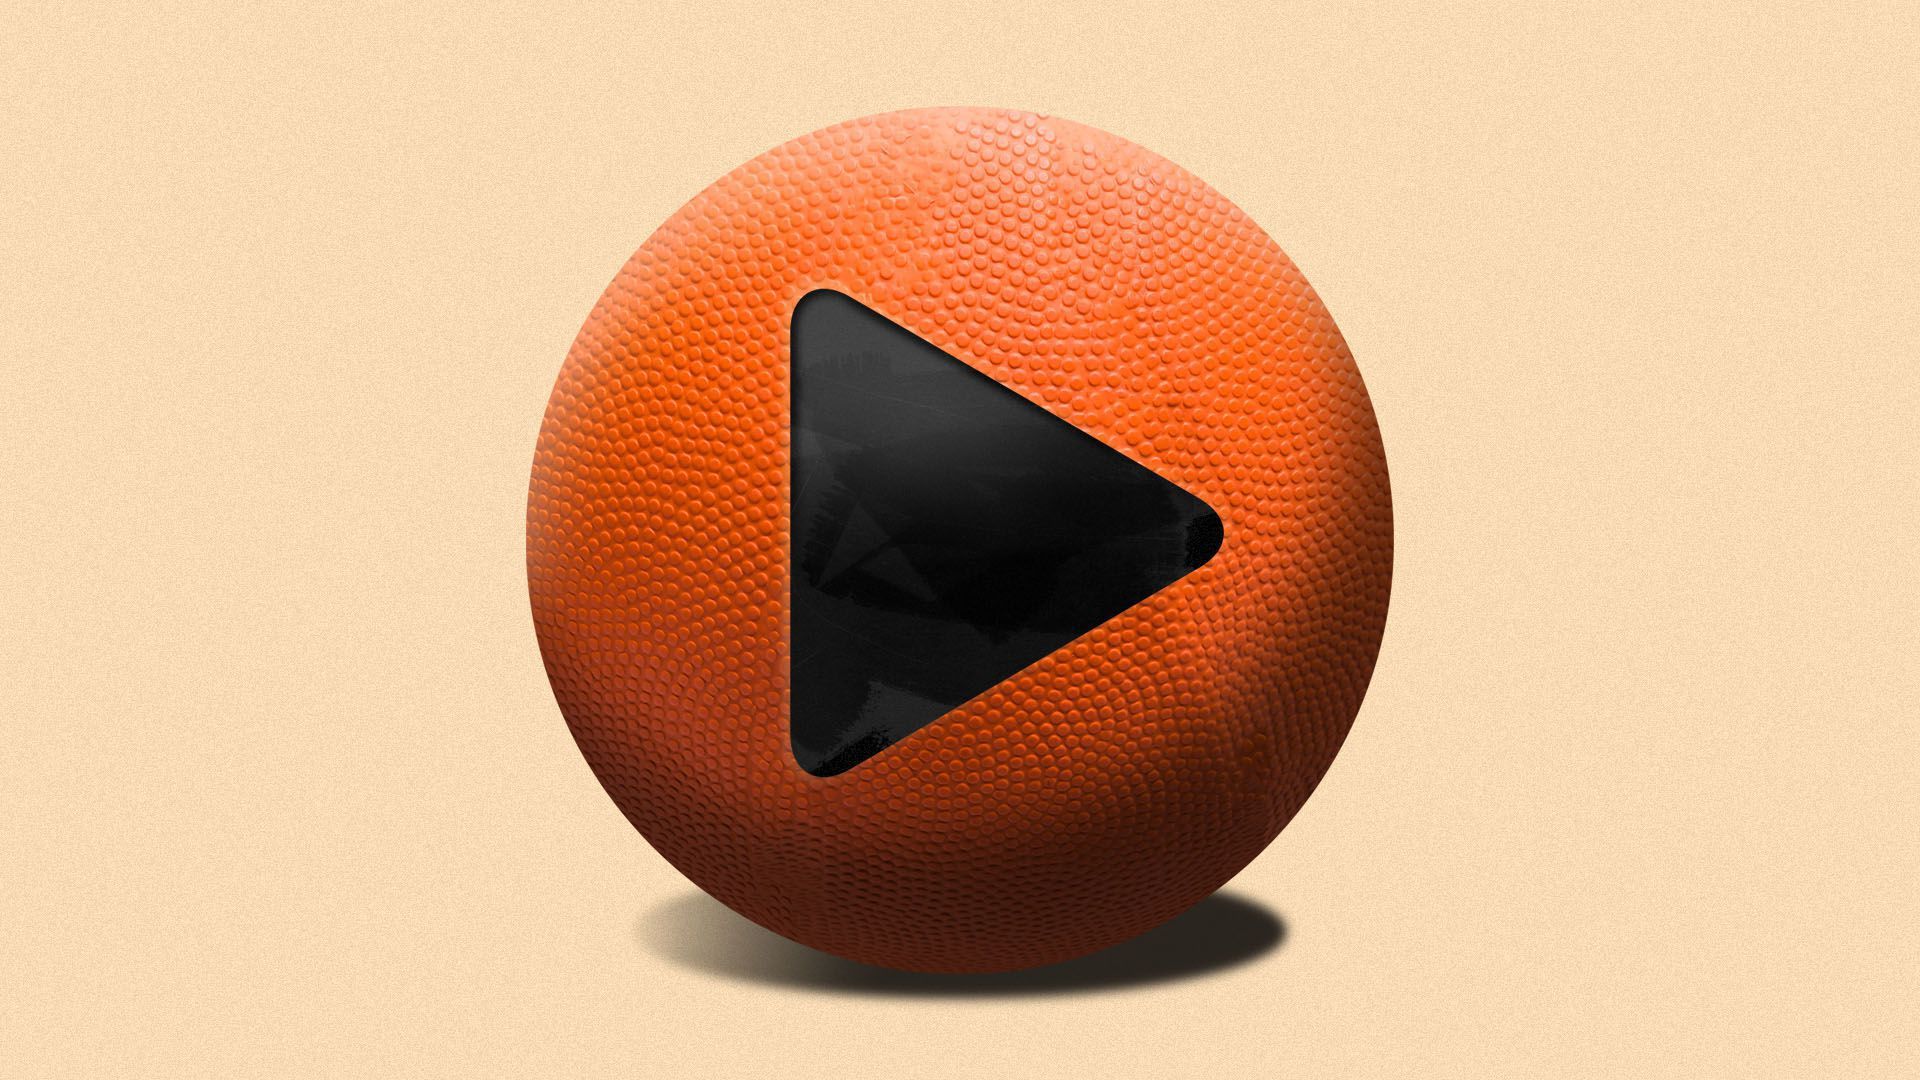 Illustration of a basketball with a play button.